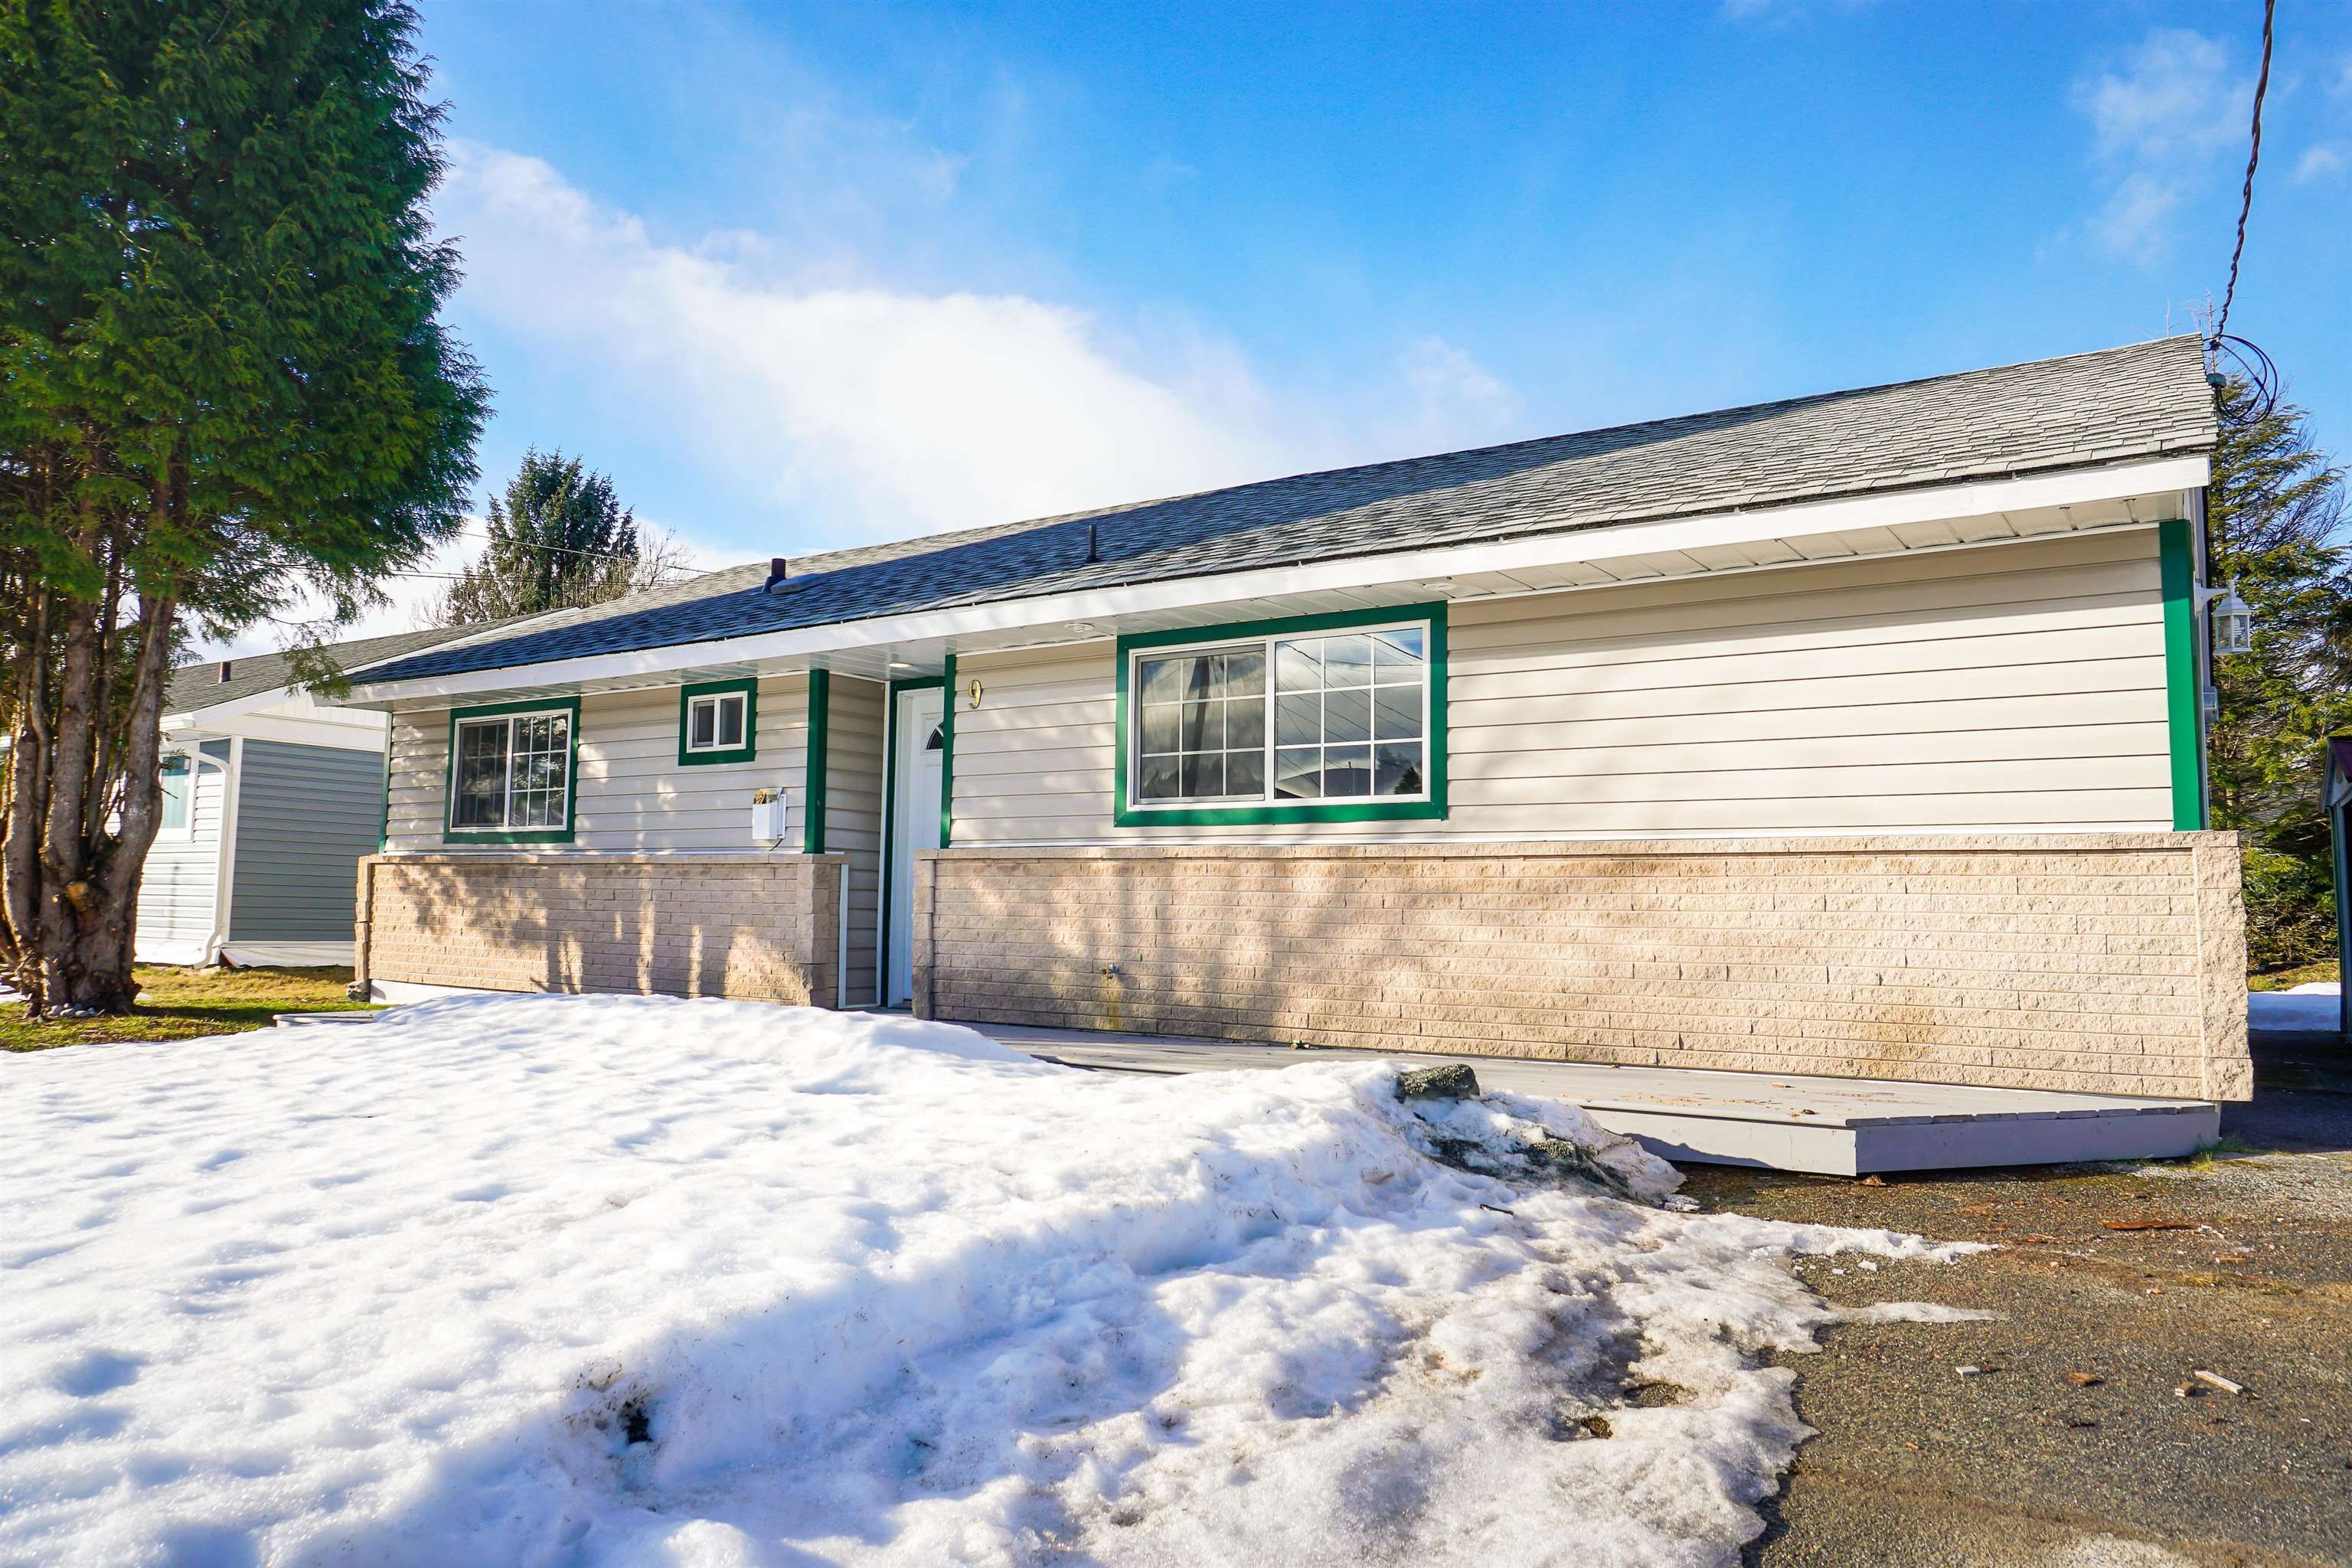 New property listed in Kitimat, Kitimat